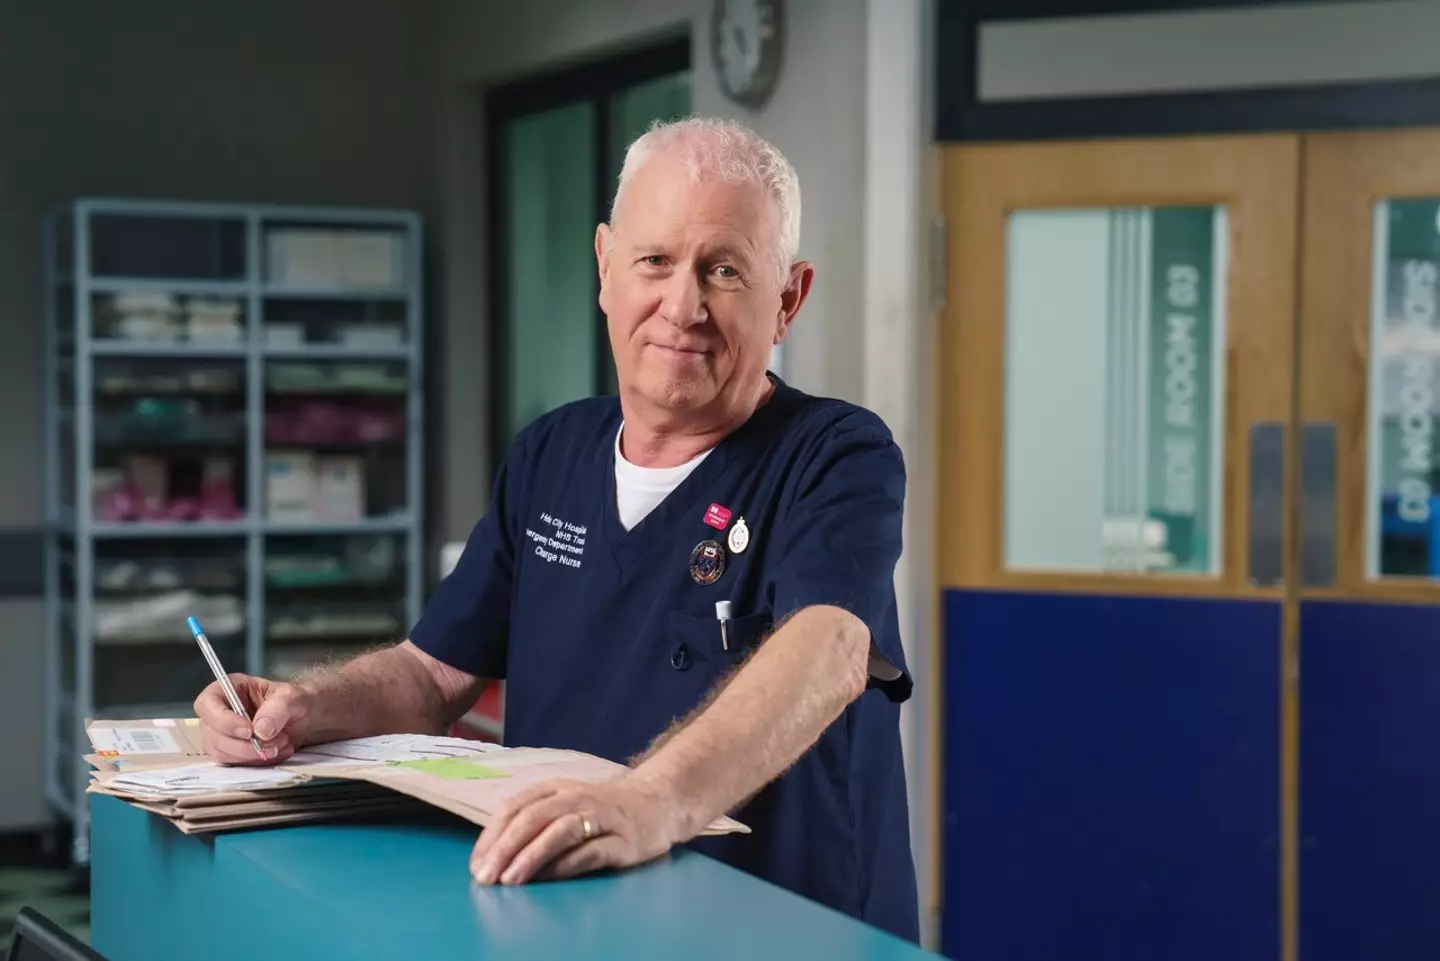 Casualty's Derek Thompson was known for playing Charlie Fairhead who was inspired by a real nurse.